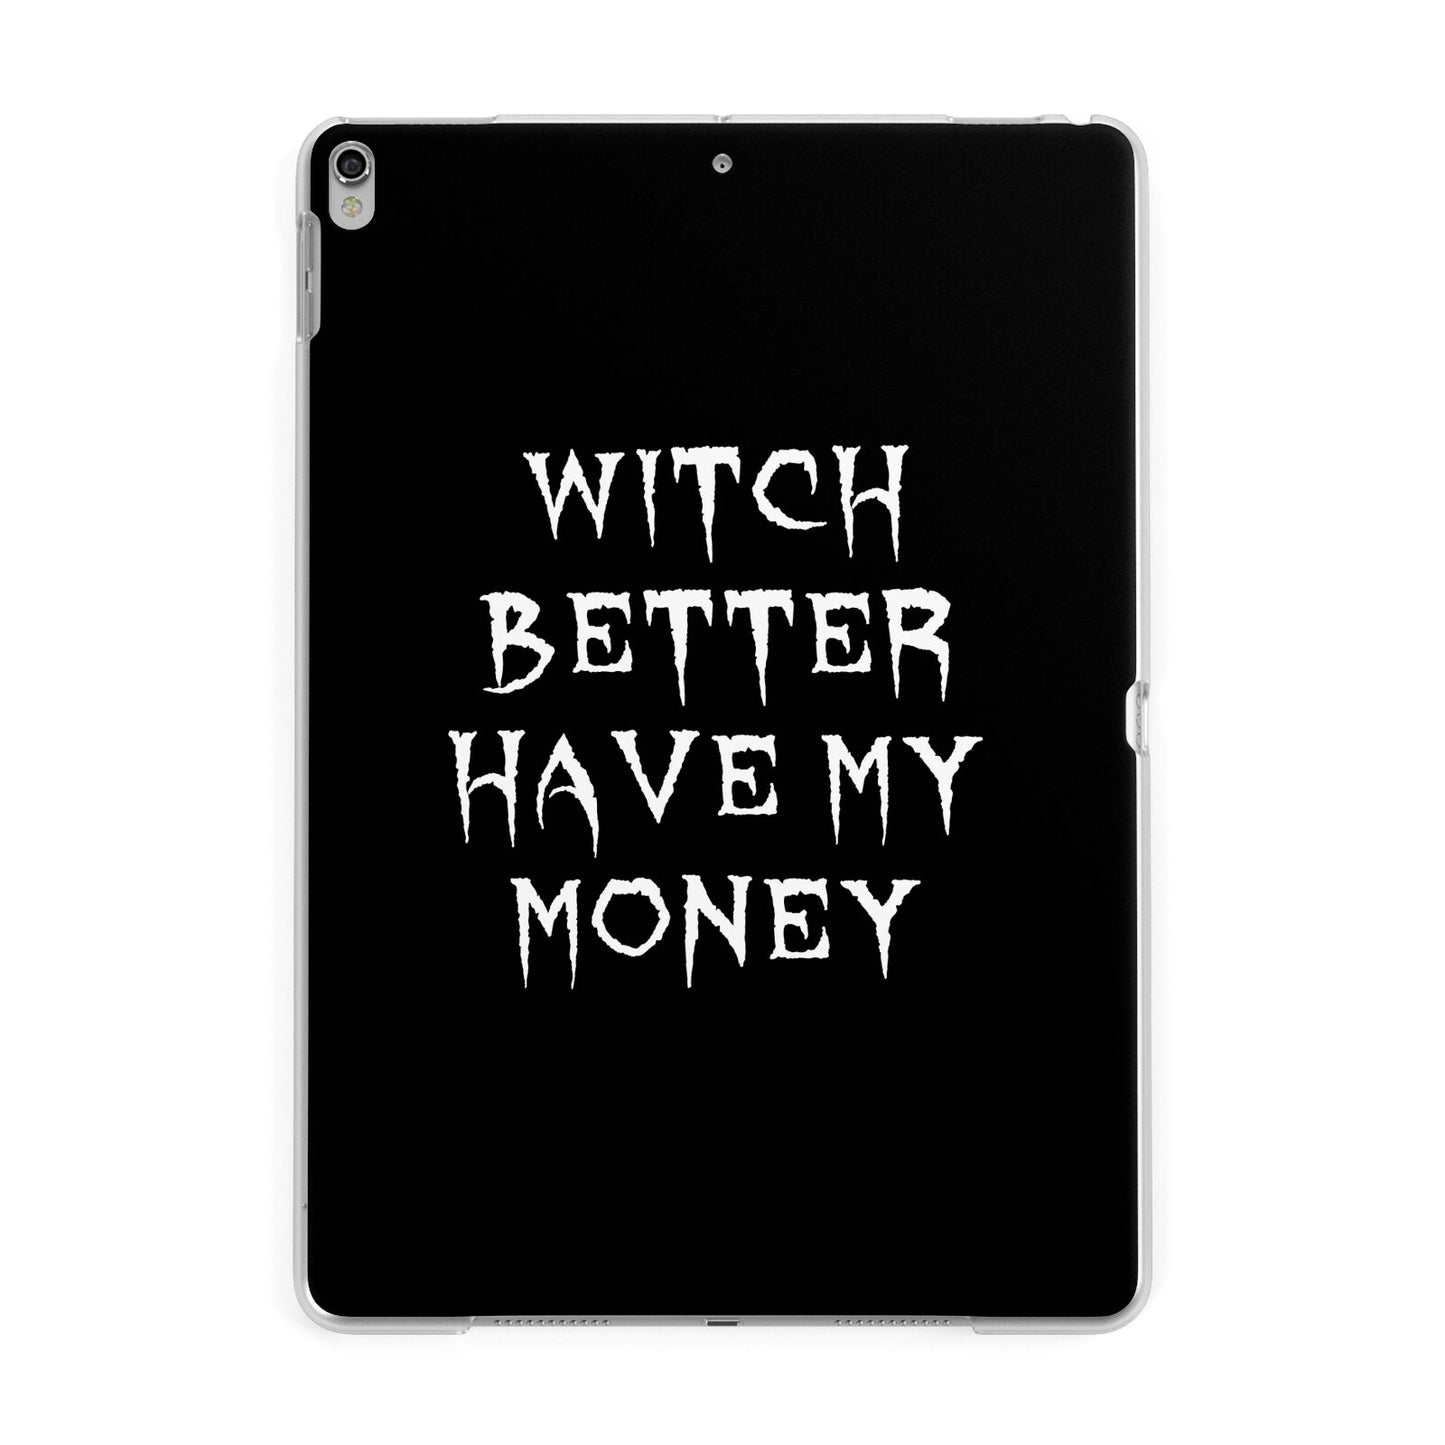 Witch Better Have My Money Apple iPad Silver Case